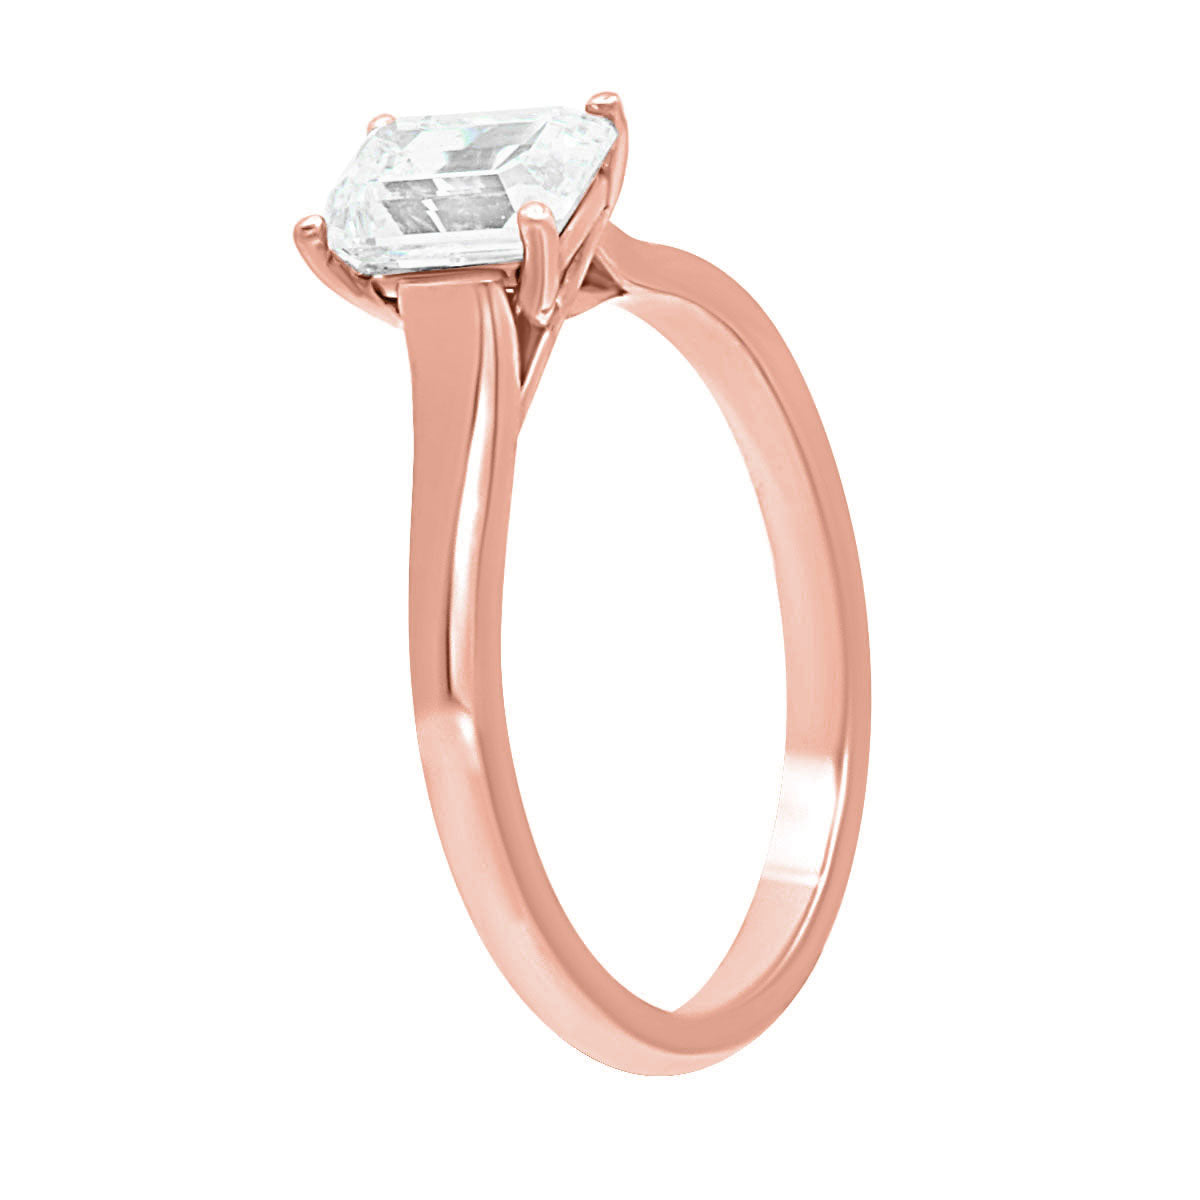 Emerald cut solitaire engagement ring IN rose gold in an upright position